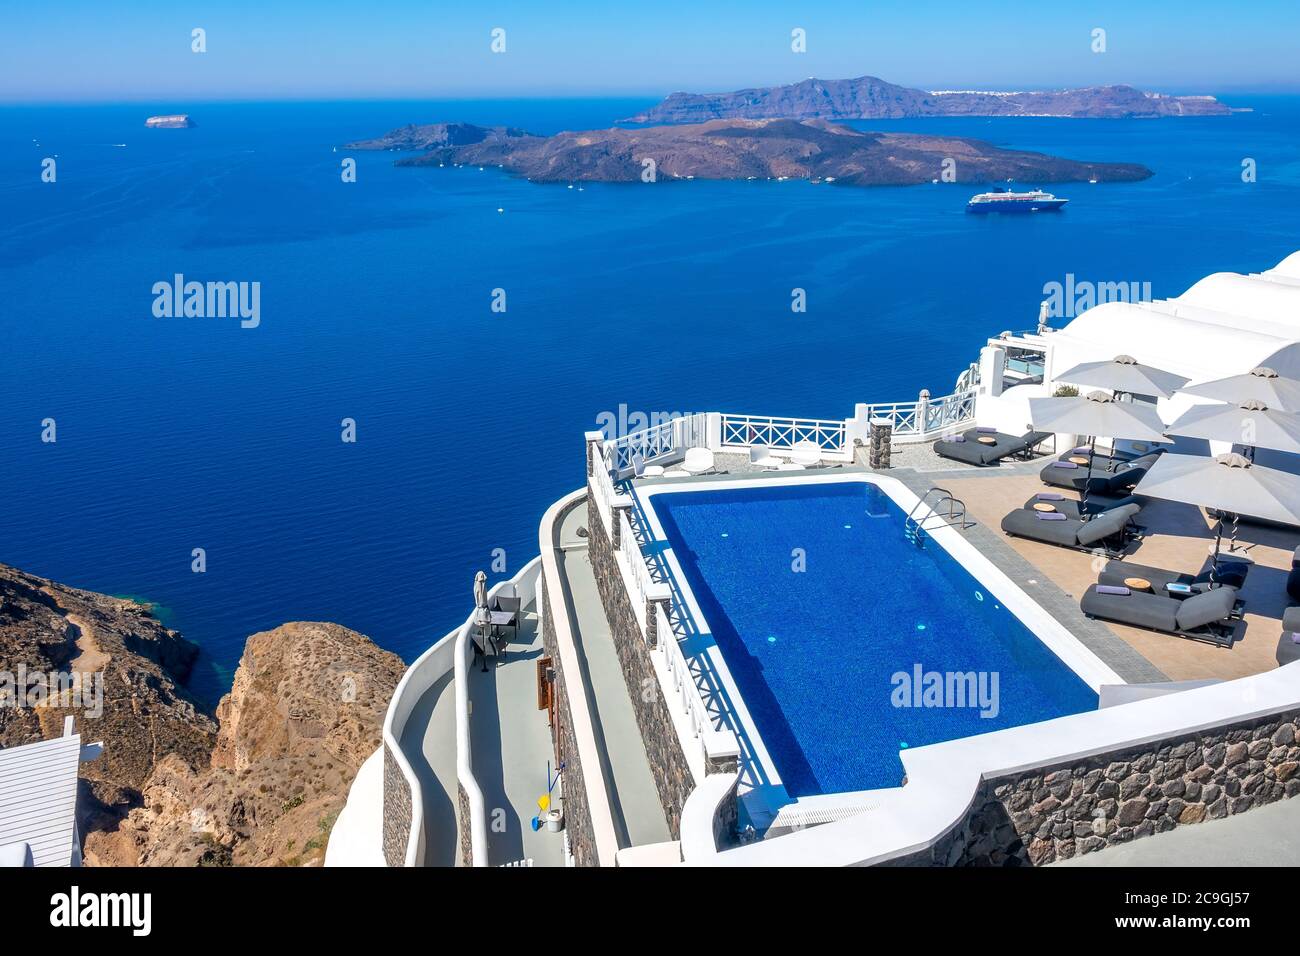 Greece. Thira island. Santorini. Hotel on the high bank in Oia. Pool and sun loungers for relaxation in sunny weather. Seascape Stock Photo